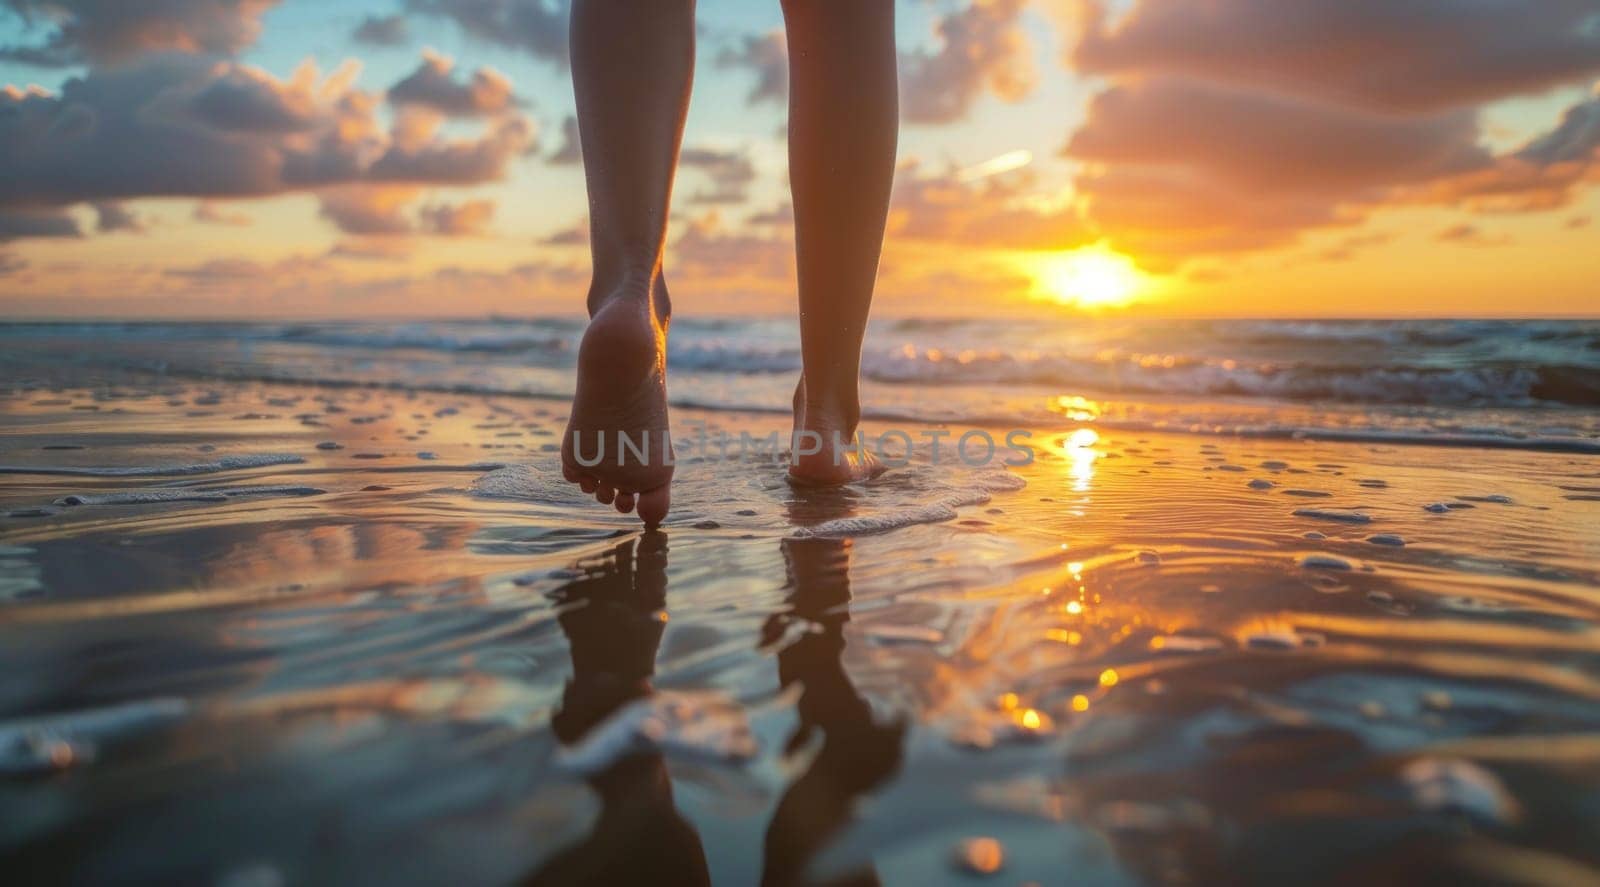 A woman's feet are in the water at sunset.